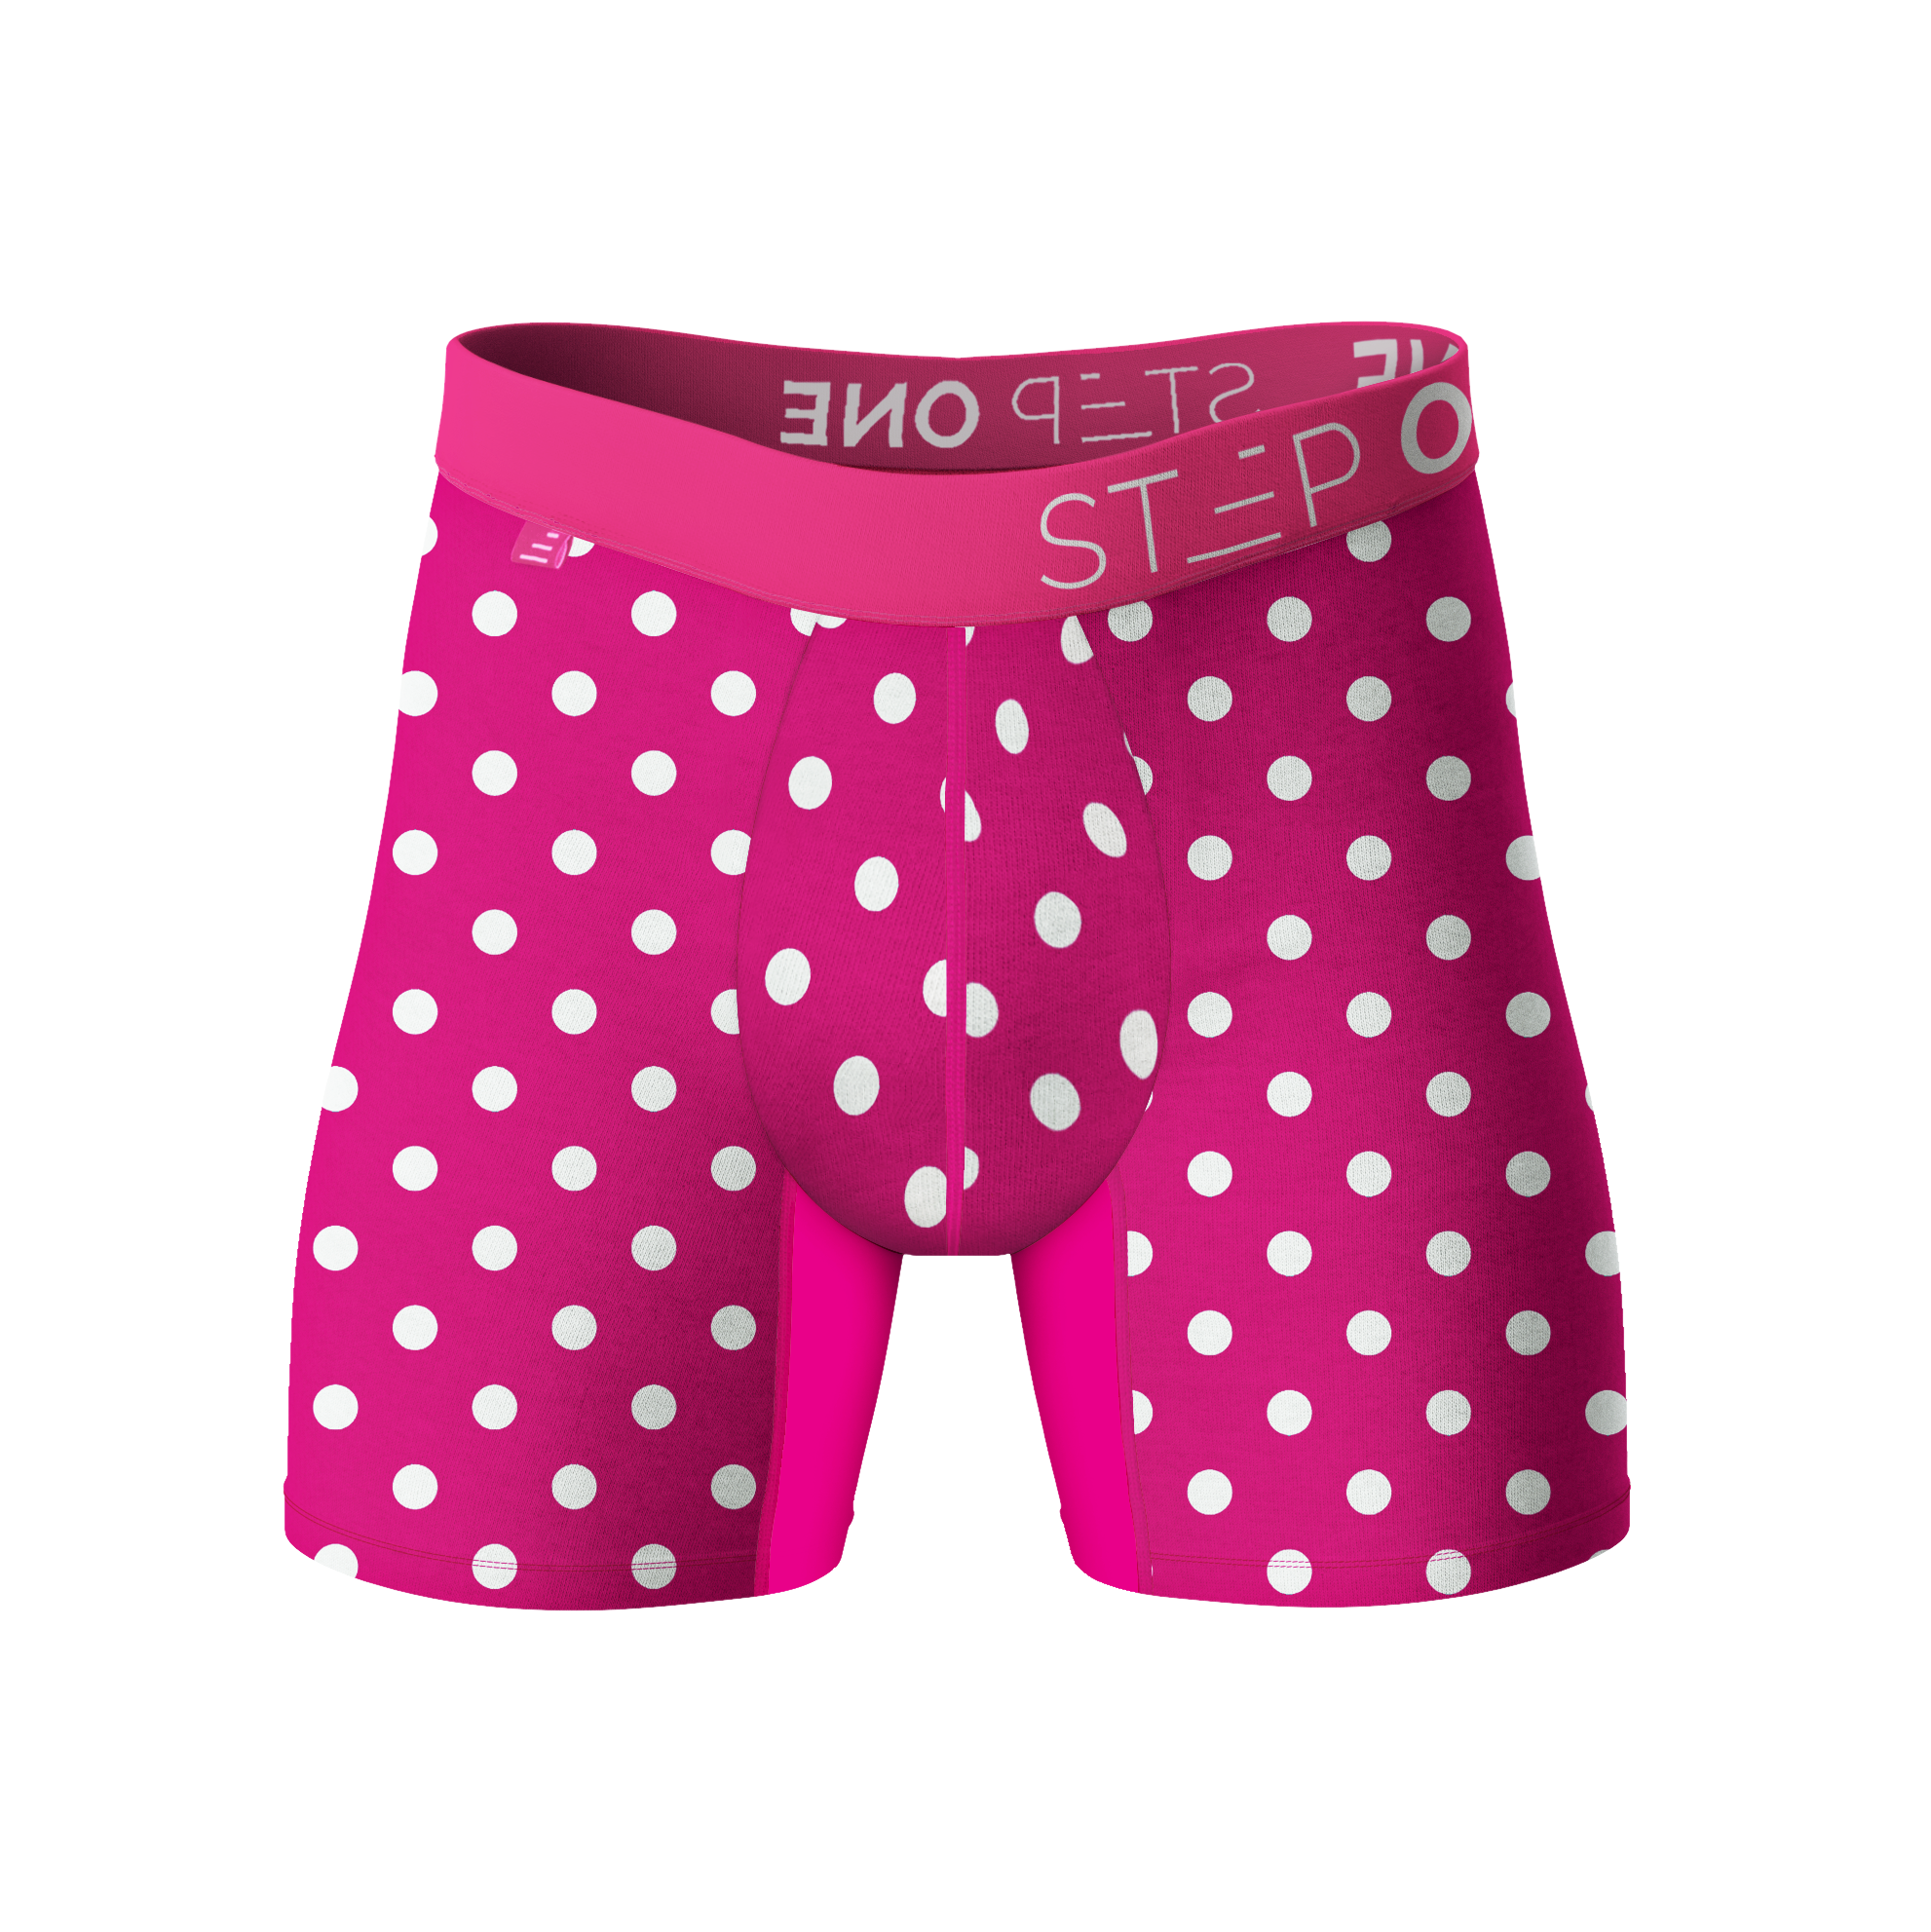 Boxer Brief - Barbee-Q's - View 1